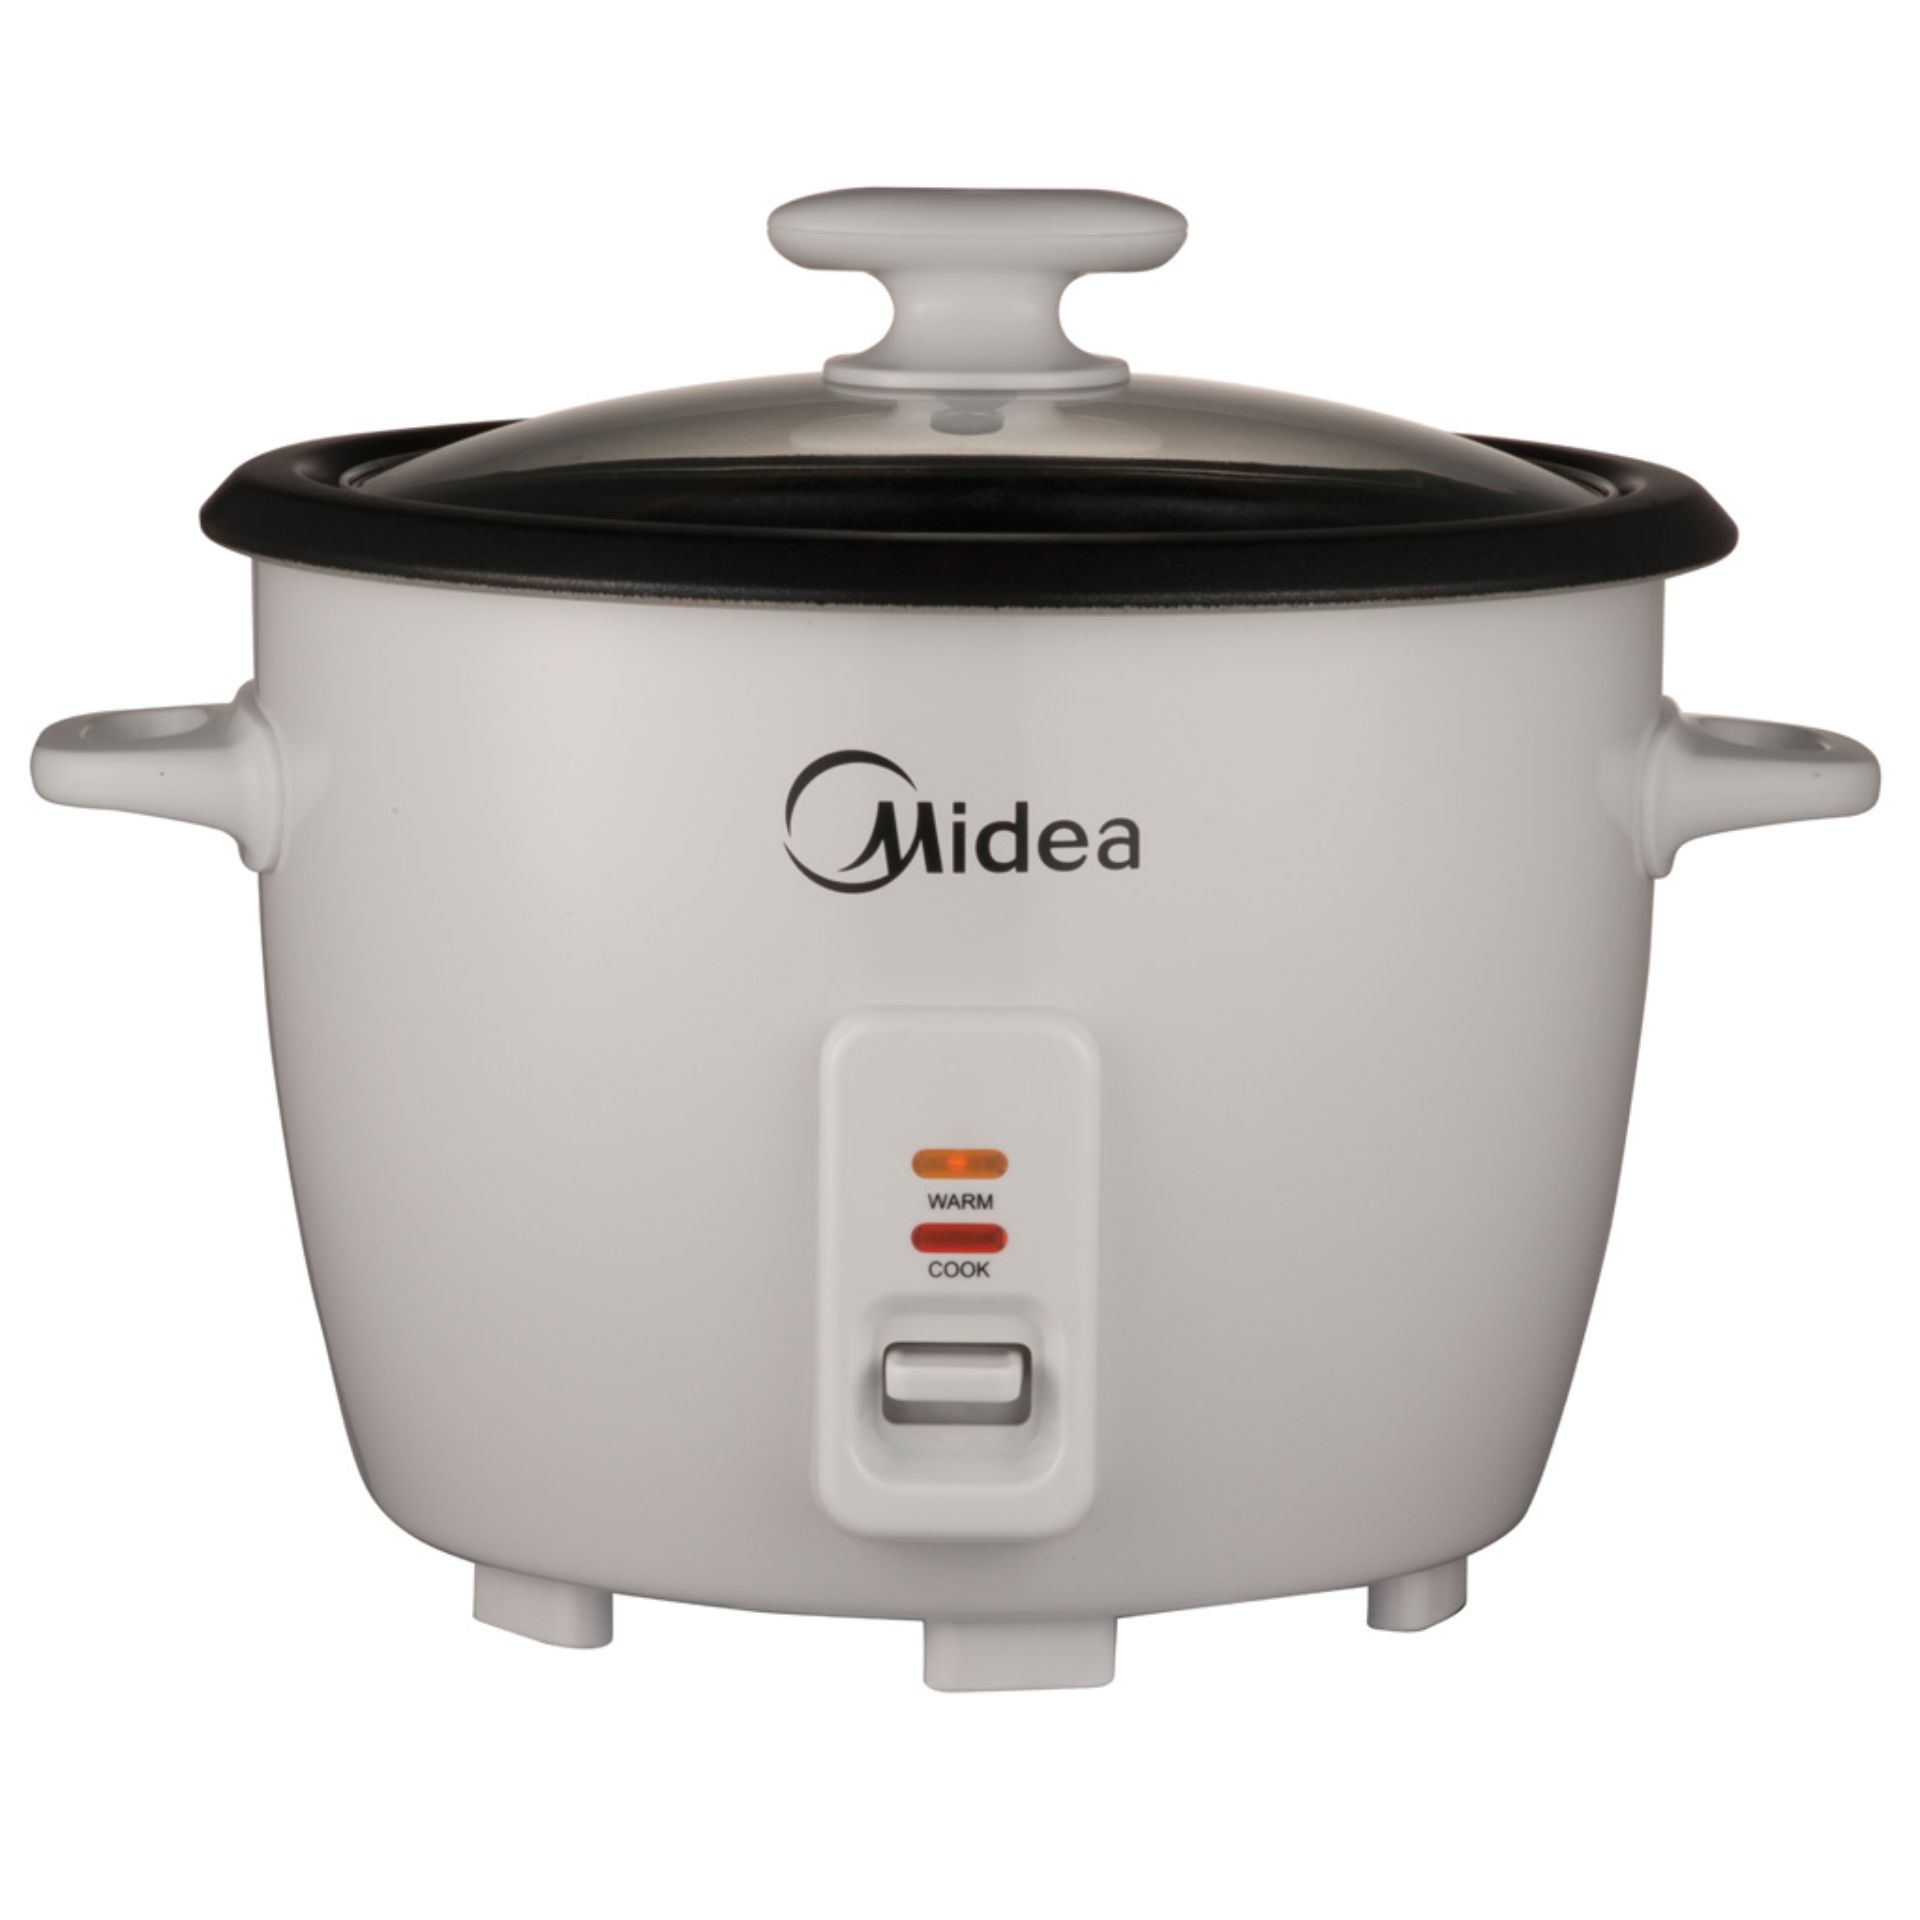 https://www.midea.com/content/dam/midea-aem/my/kitchen-appliances/cookers/rice-cookers/0-6l-conventional-rice-cooker-mg-gp06b/gallery1.jpg